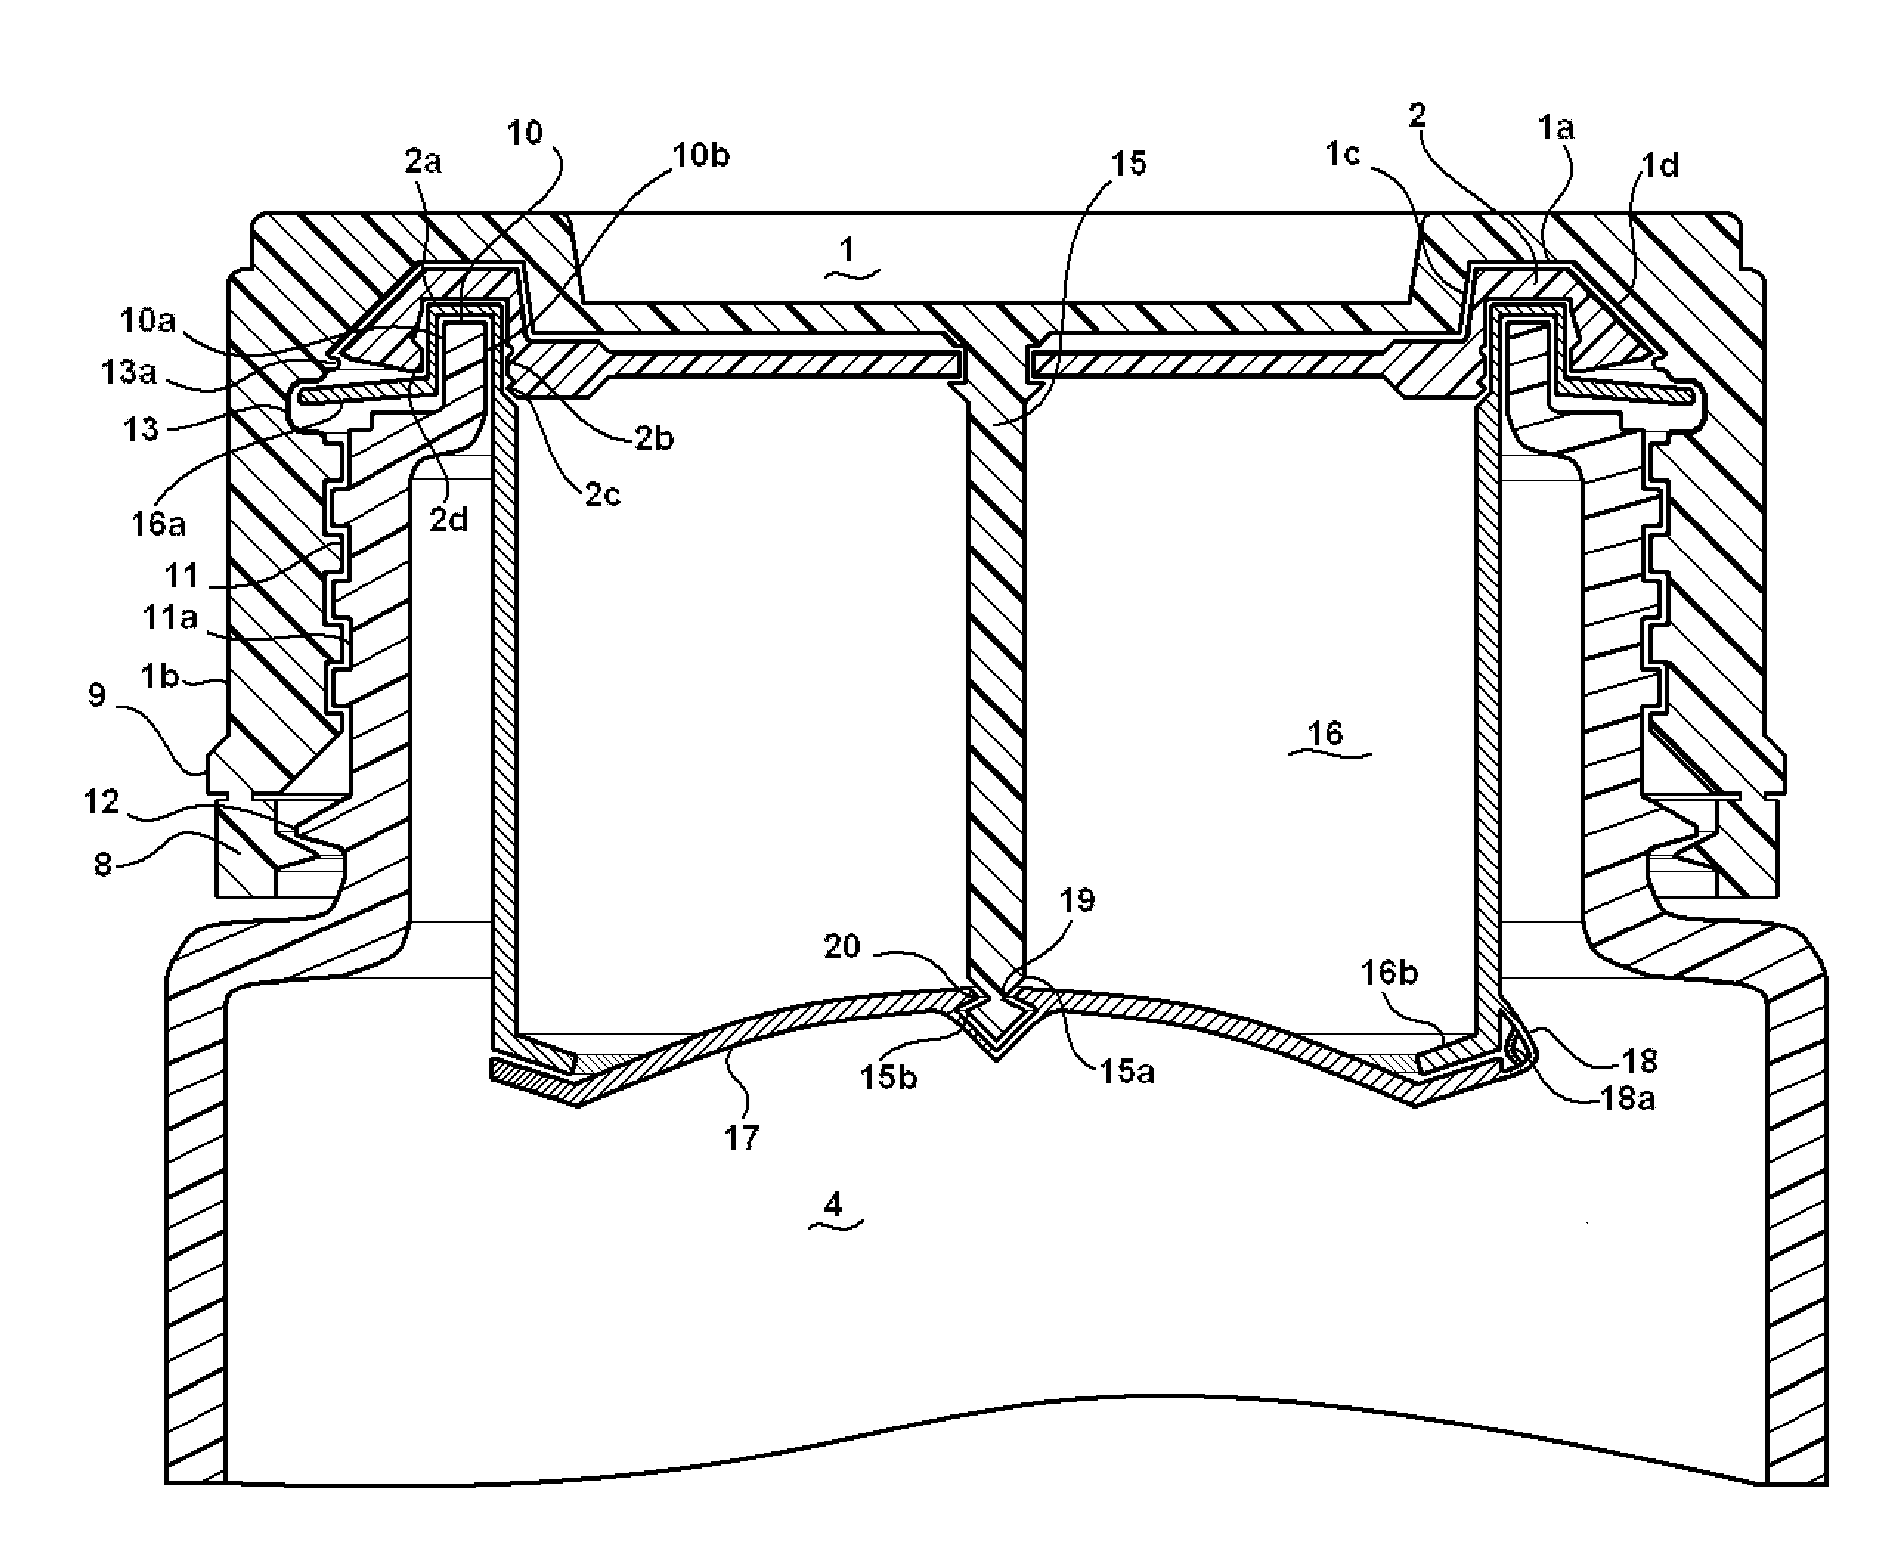 Three-part closure sealing and dispensing device for all types of Containers